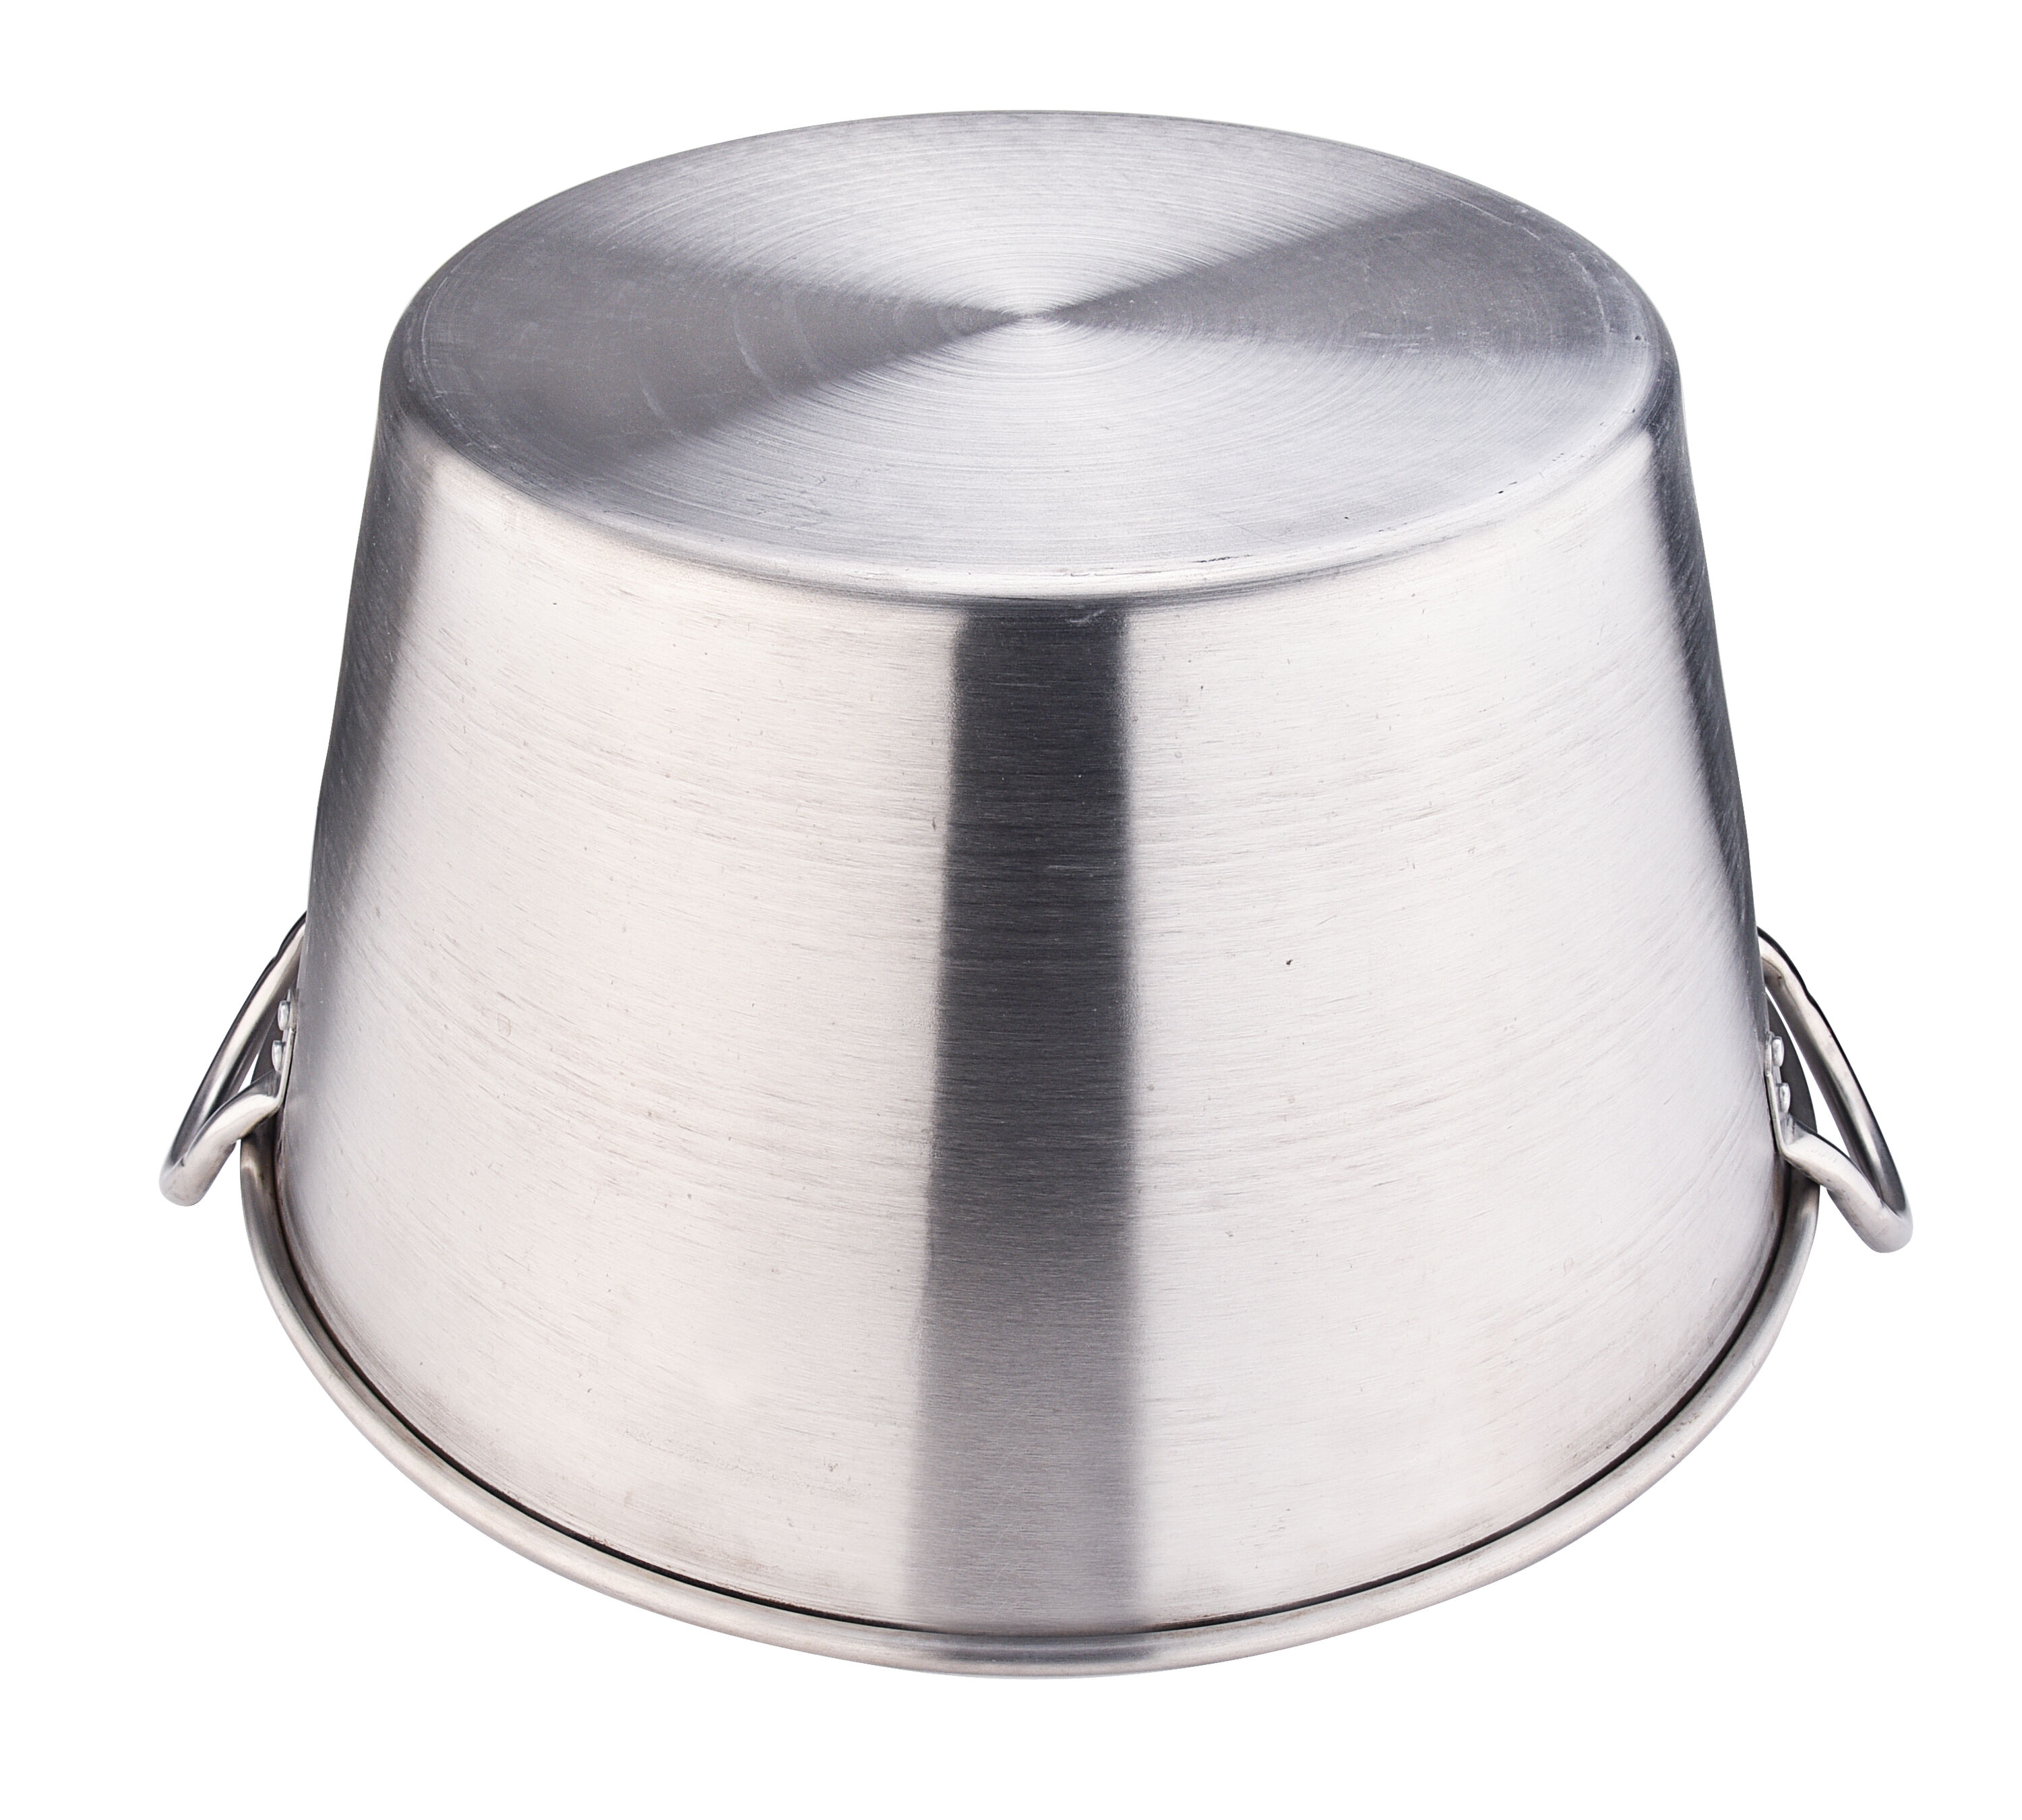 Cazo Grande Para Carnitas Extra Large 16x7 inch Stainless Steel